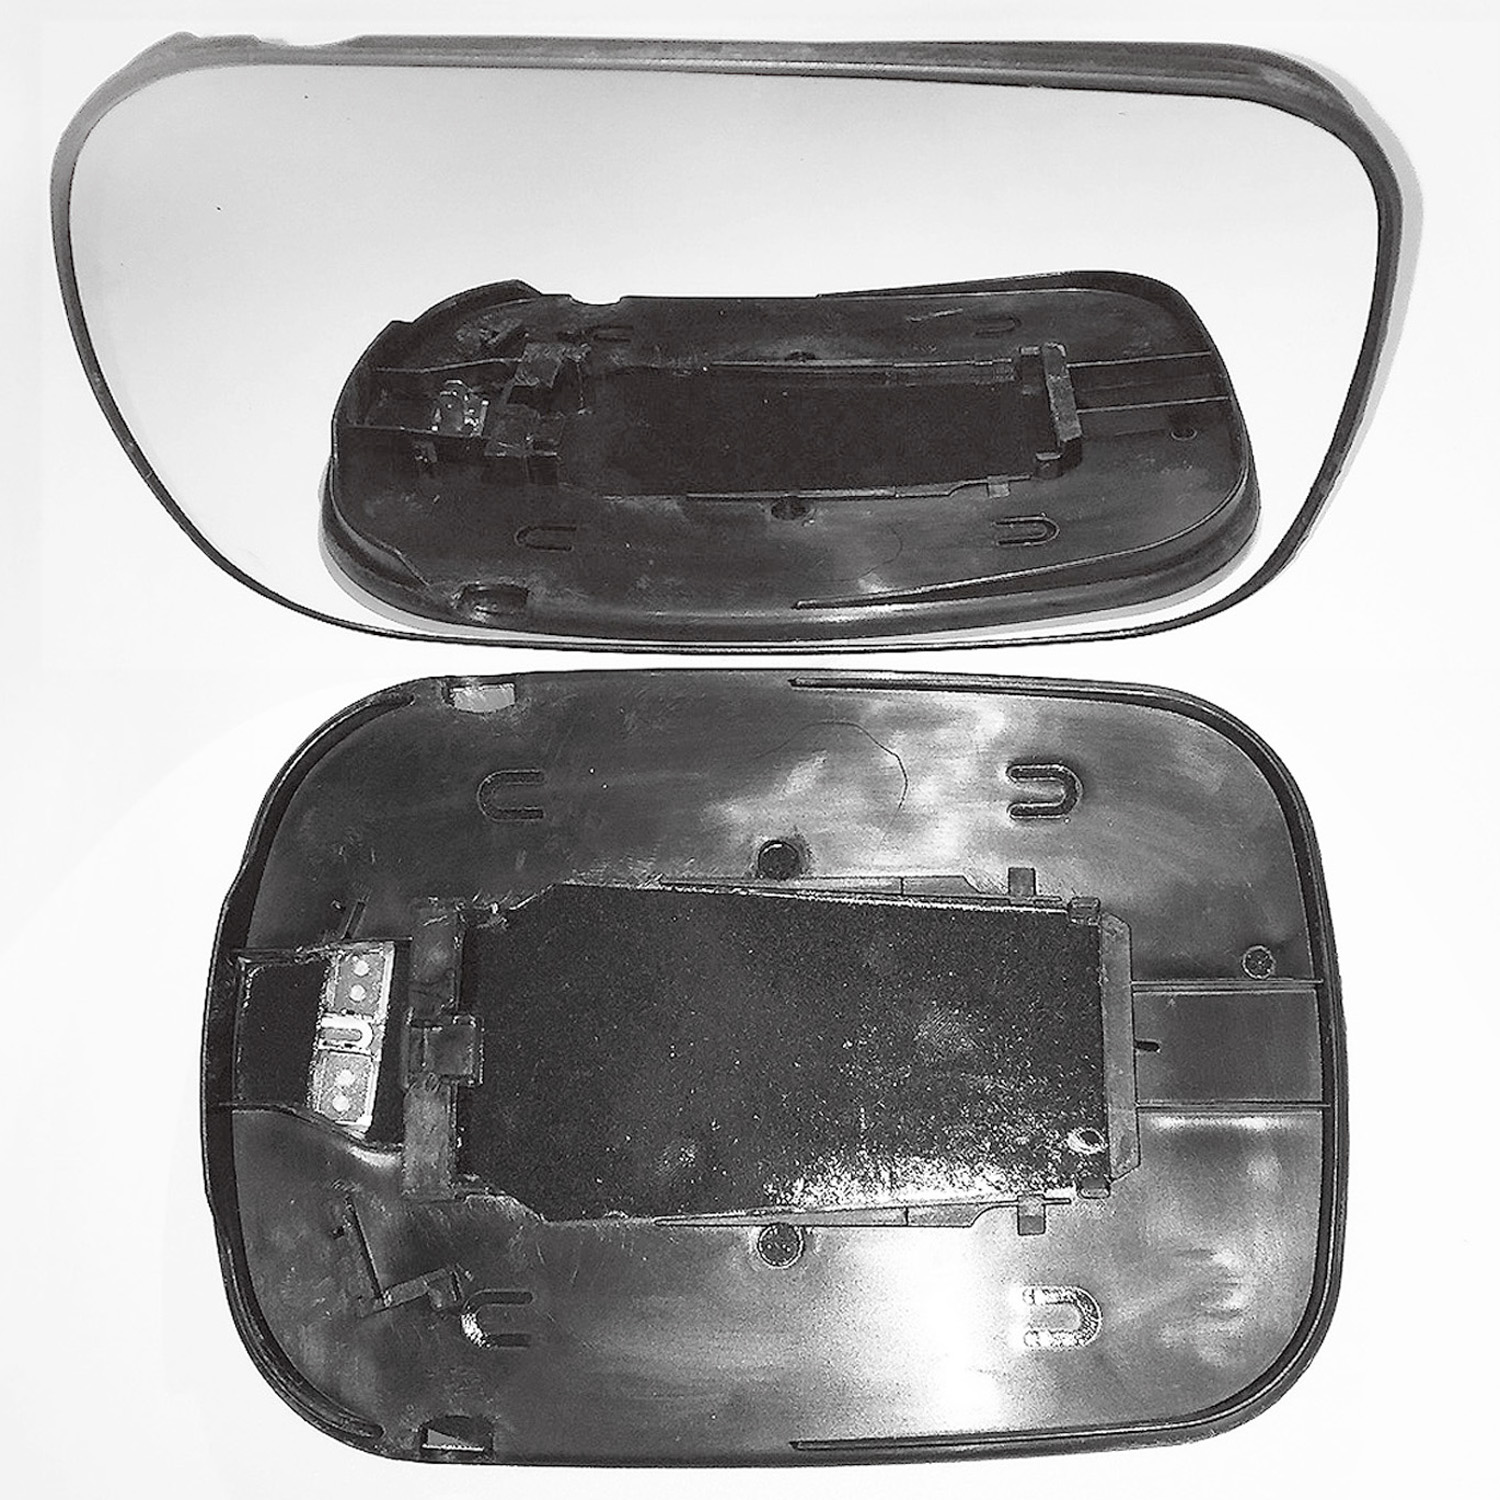 Volvo XC90 Wing Mirror Glass With Base LEFT HAND ( UK Passenger Side ) 2003 to 2006 – Heated Base Convex Mirror